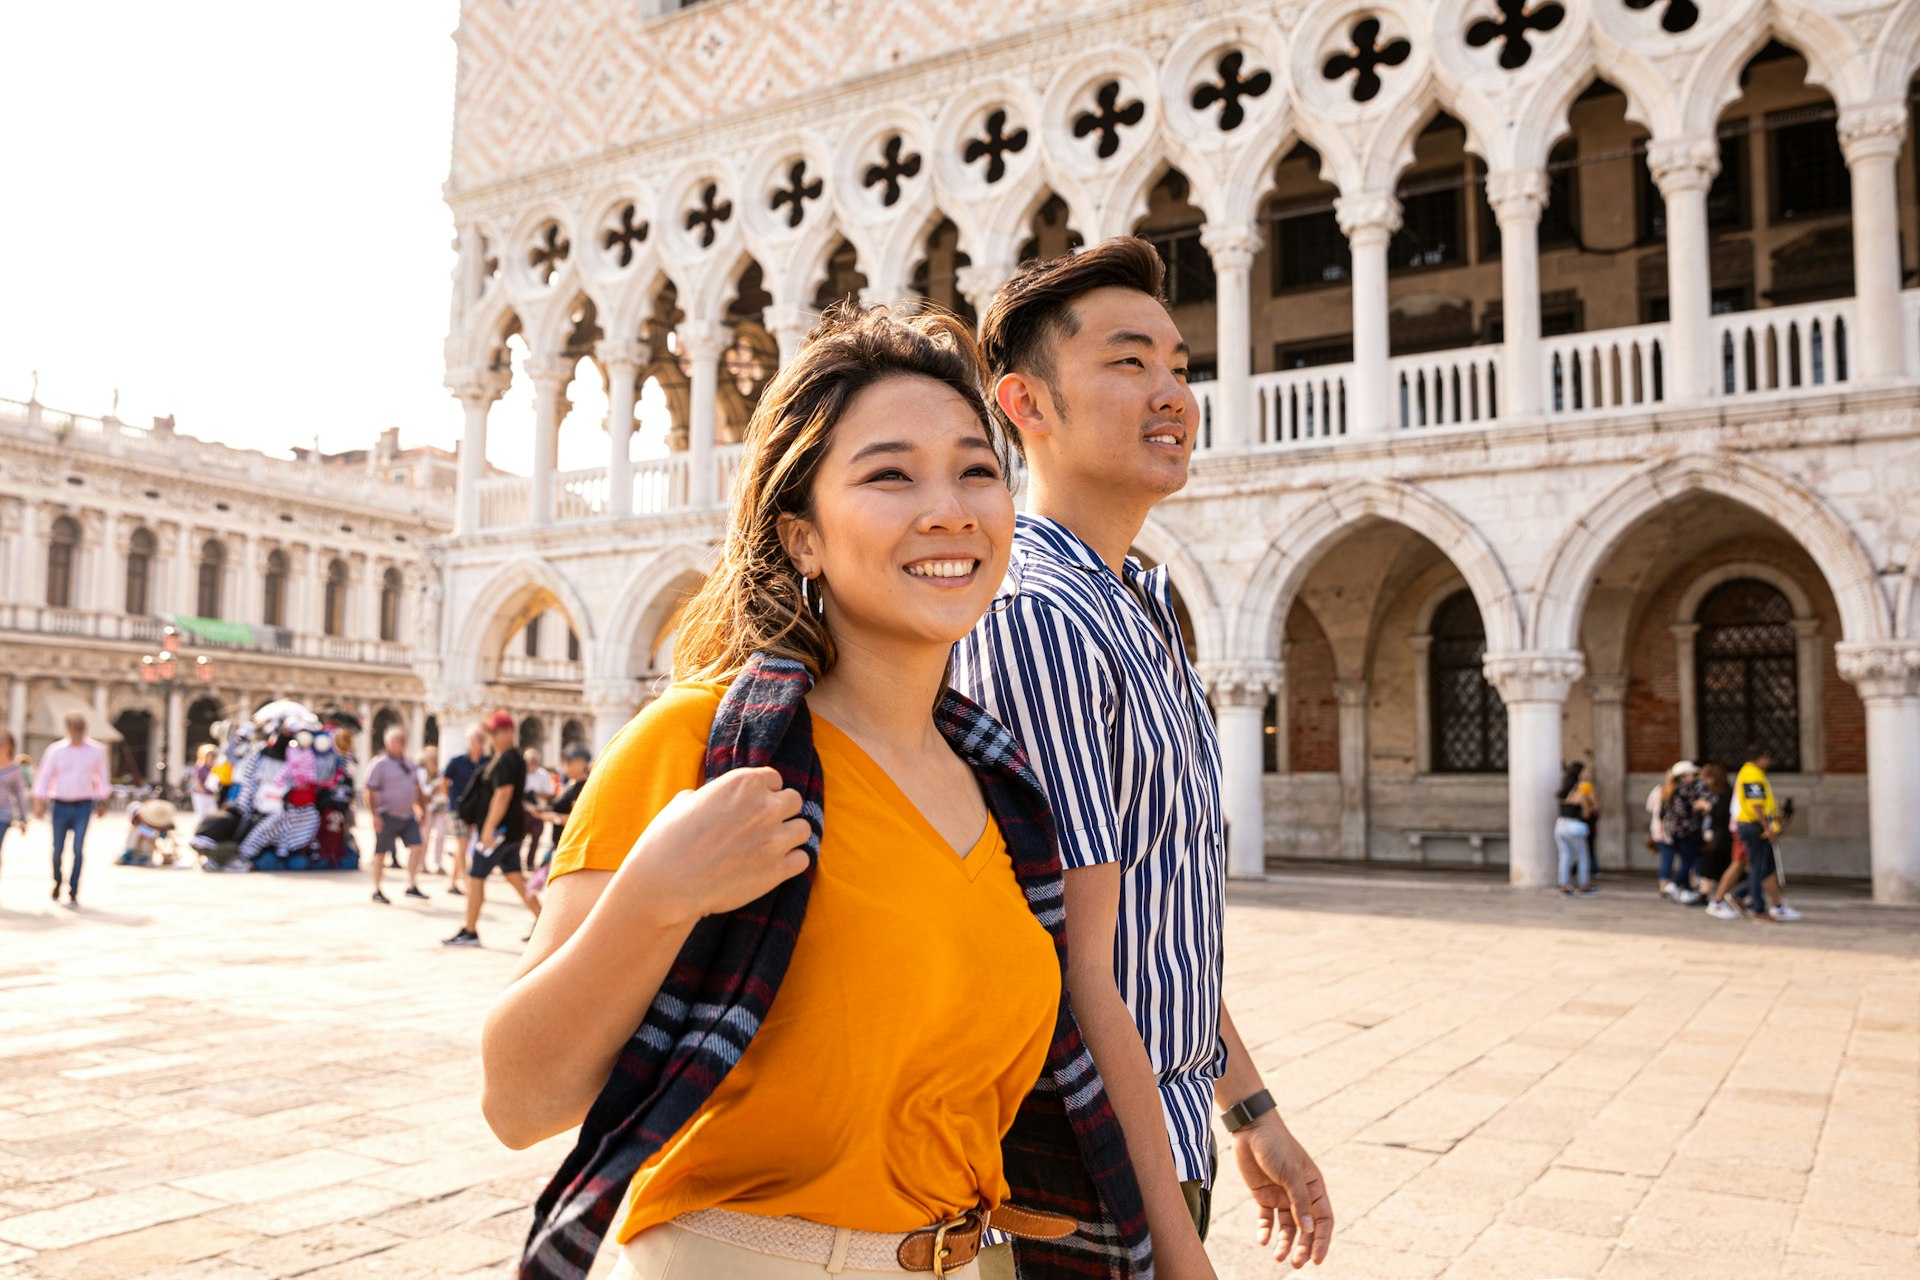 An Asian couple wander near Piazza San Marco in Venice. She is wearing a mustard yellow blouse with a burgundy scarf and he is in a white and blue striped shirt. Both are smiling as they look around. The Doge's Palace is visible in the background alongside a tourist stall and some blurred walkers.